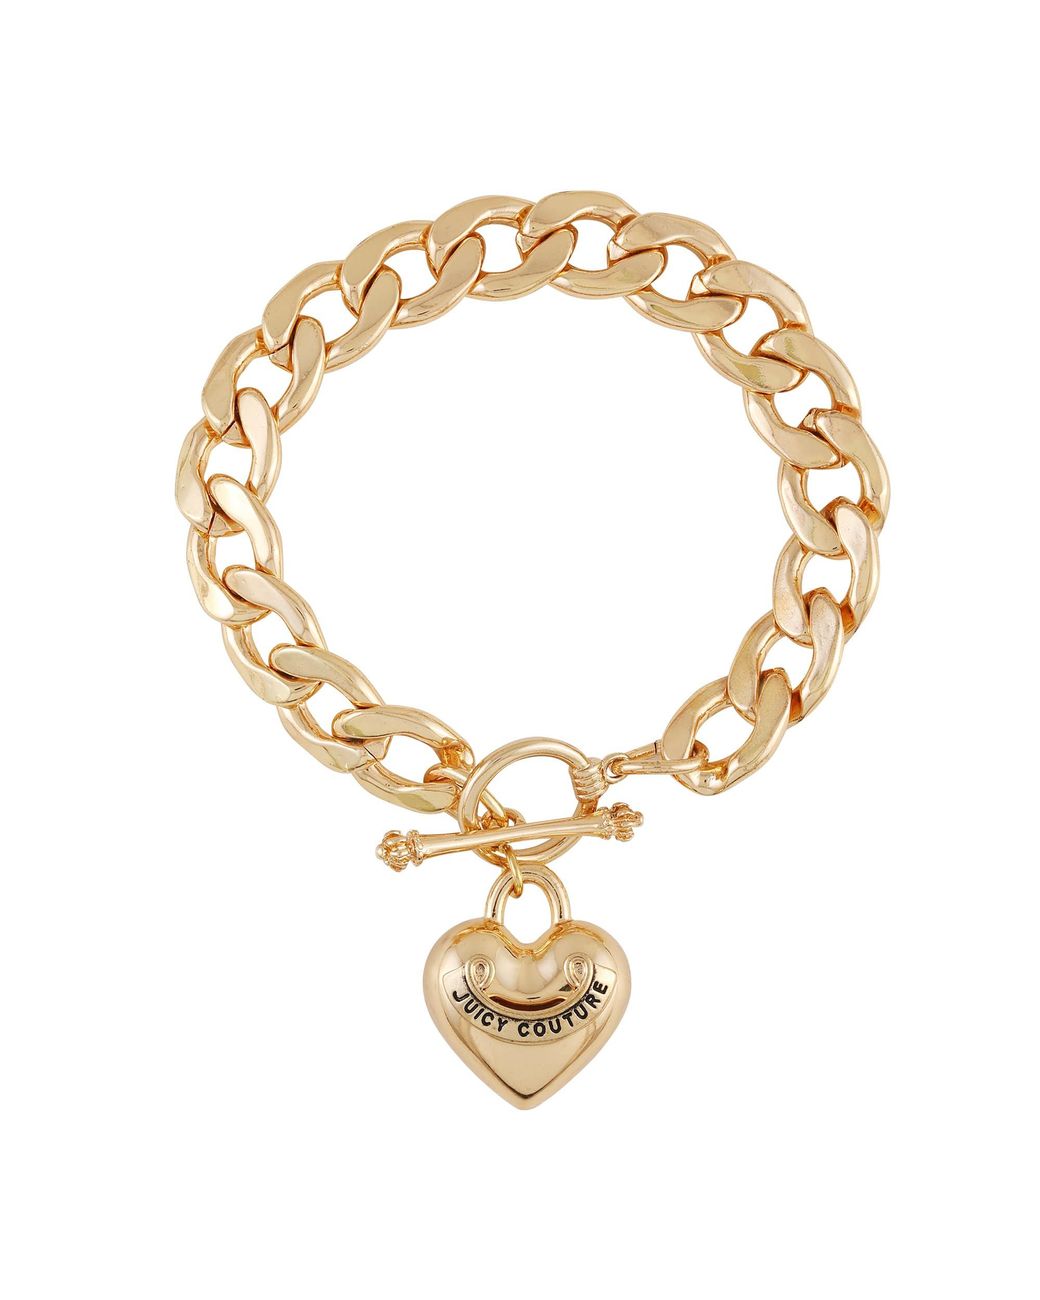 Juicy Couture Goldtone Thick Chain Heart Charm Toggle Bracelet in Metallic